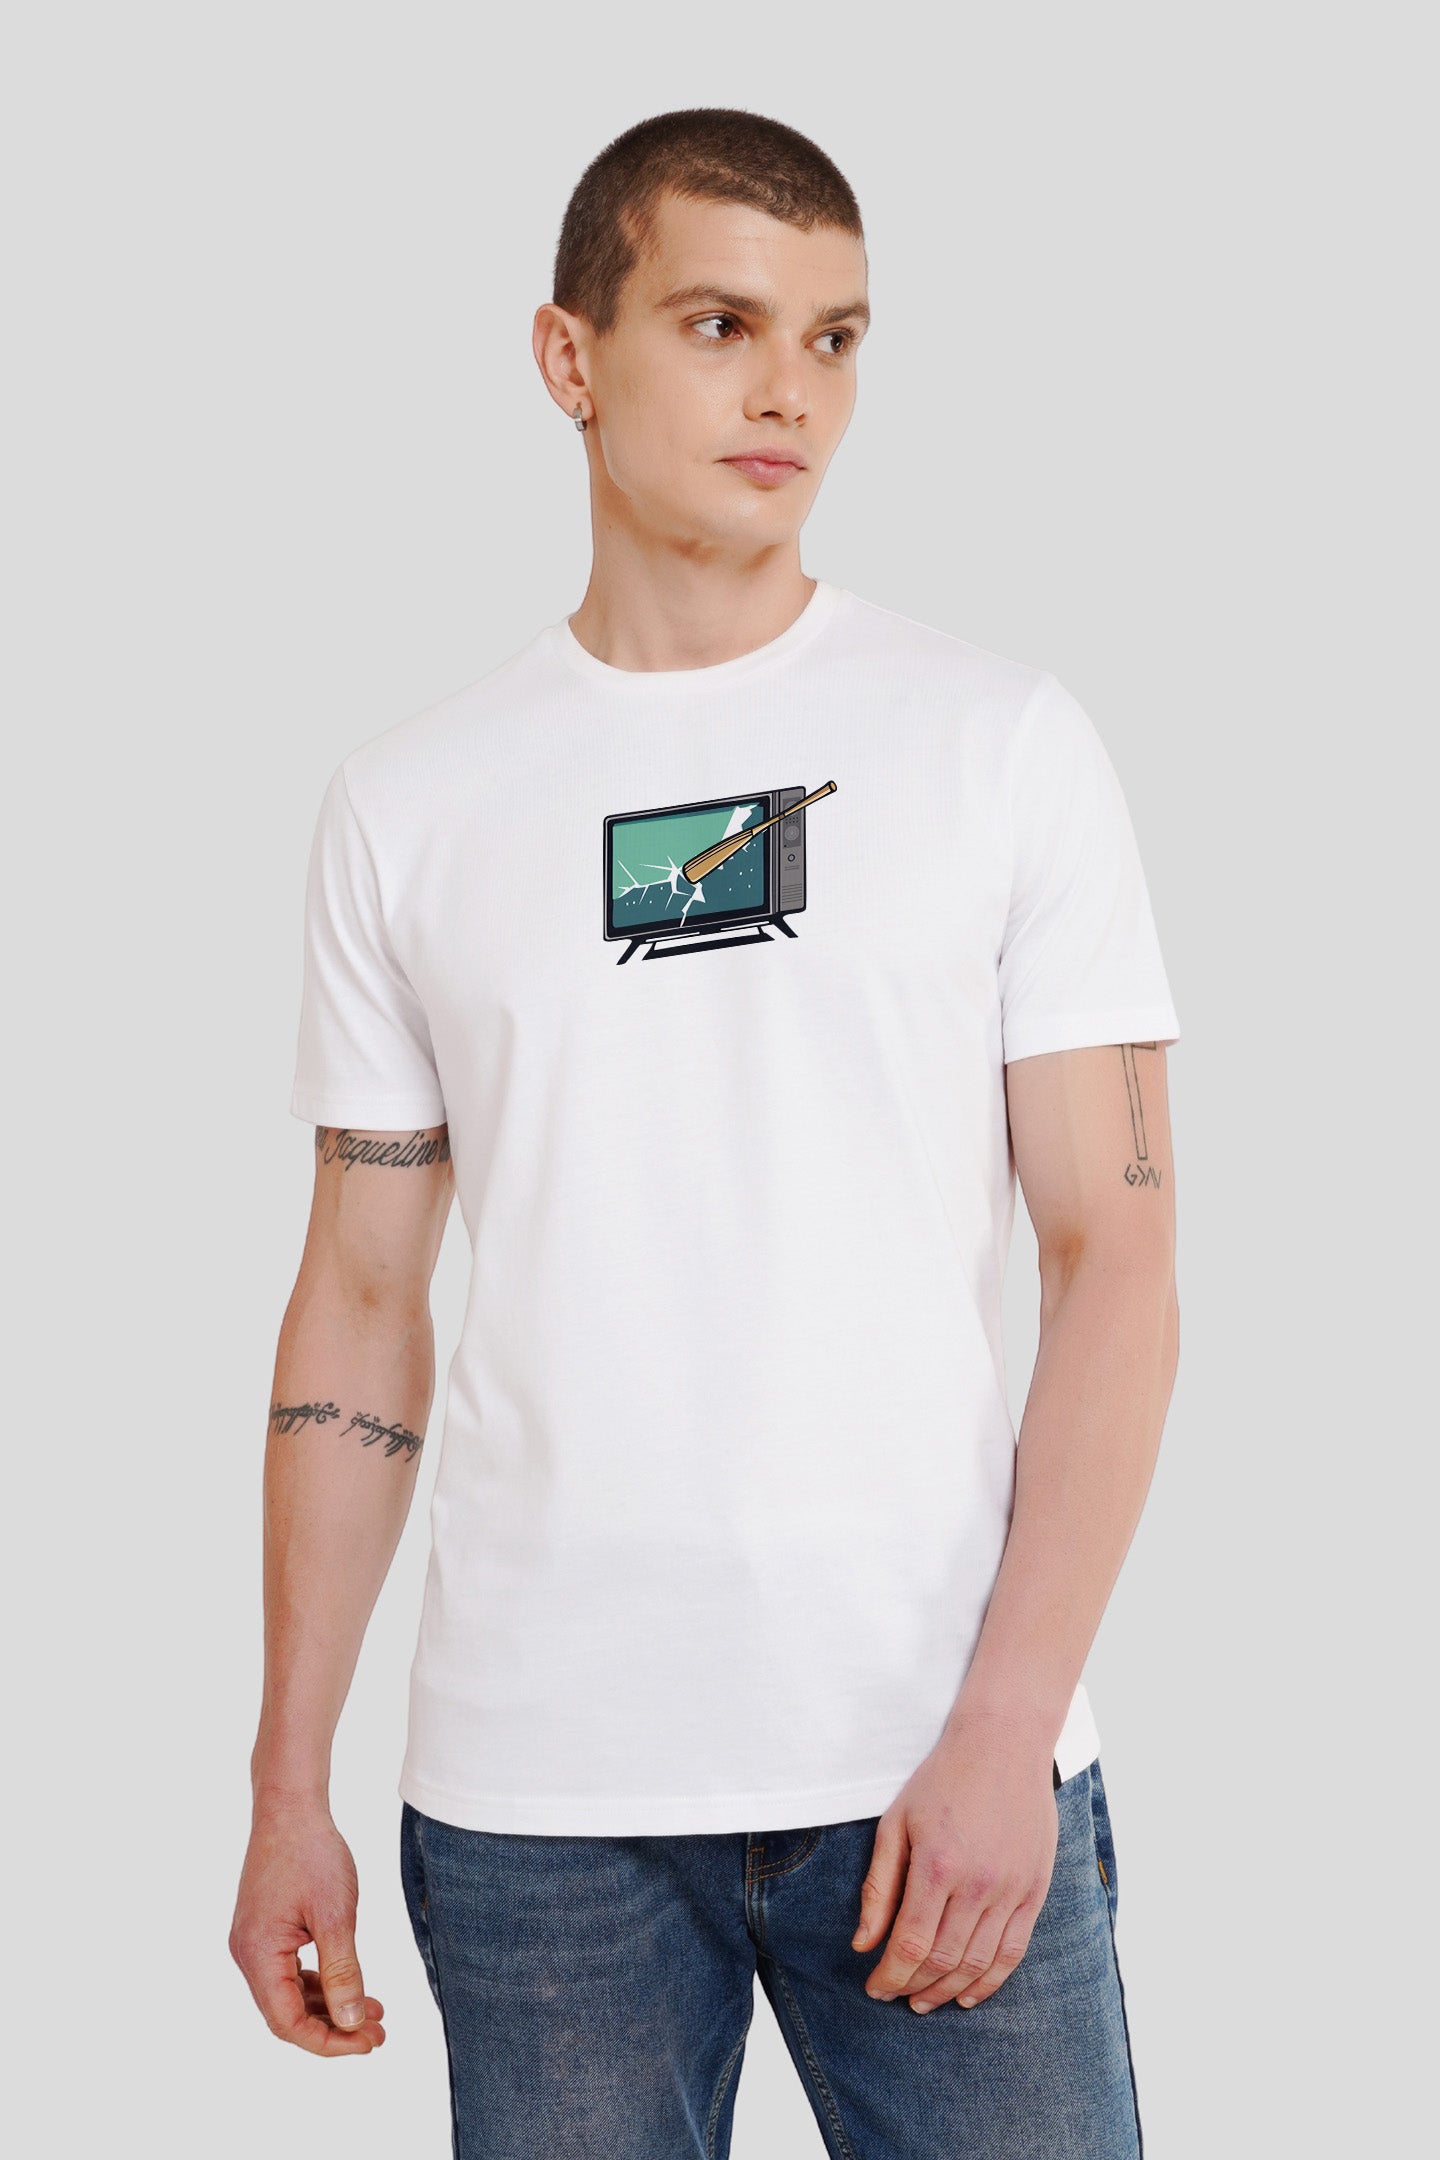 Tv White Printed T Shirt Men Regular Fit With Front Design Pic 1